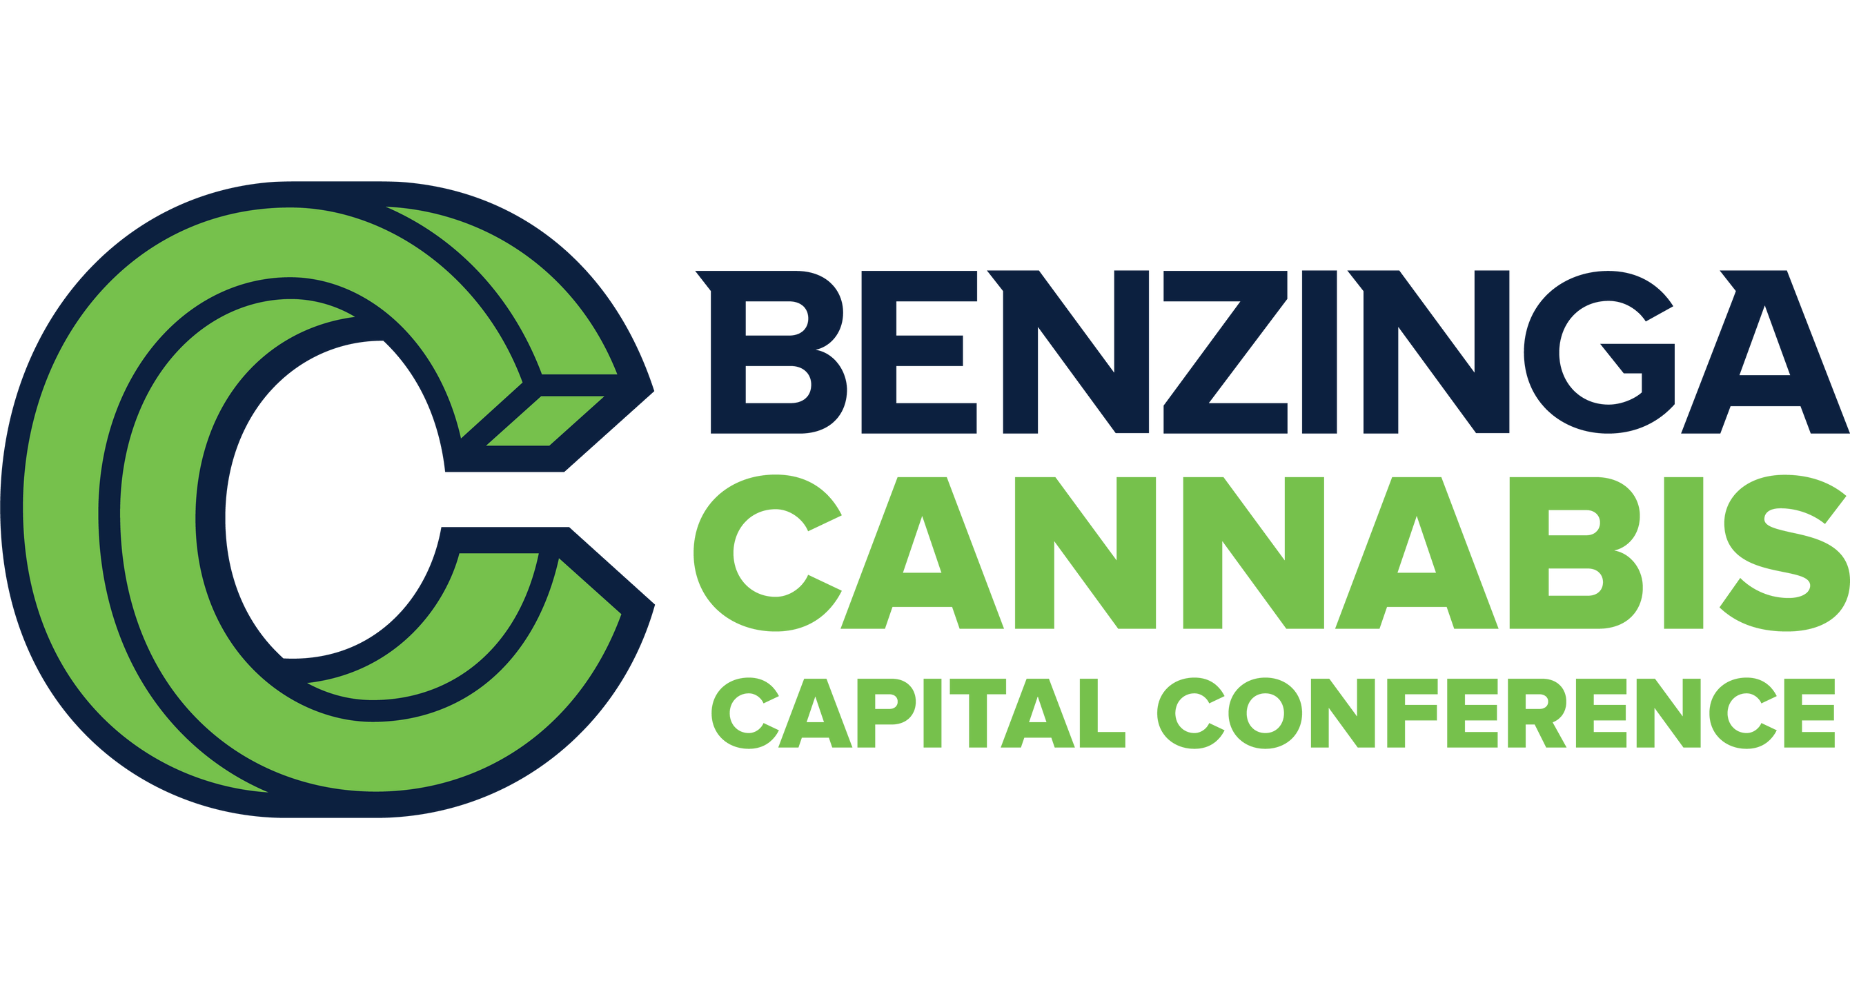 Las-Vegas Based Mystic Holdings Attends Benzinga Cannabis Capital Conference In Chicago